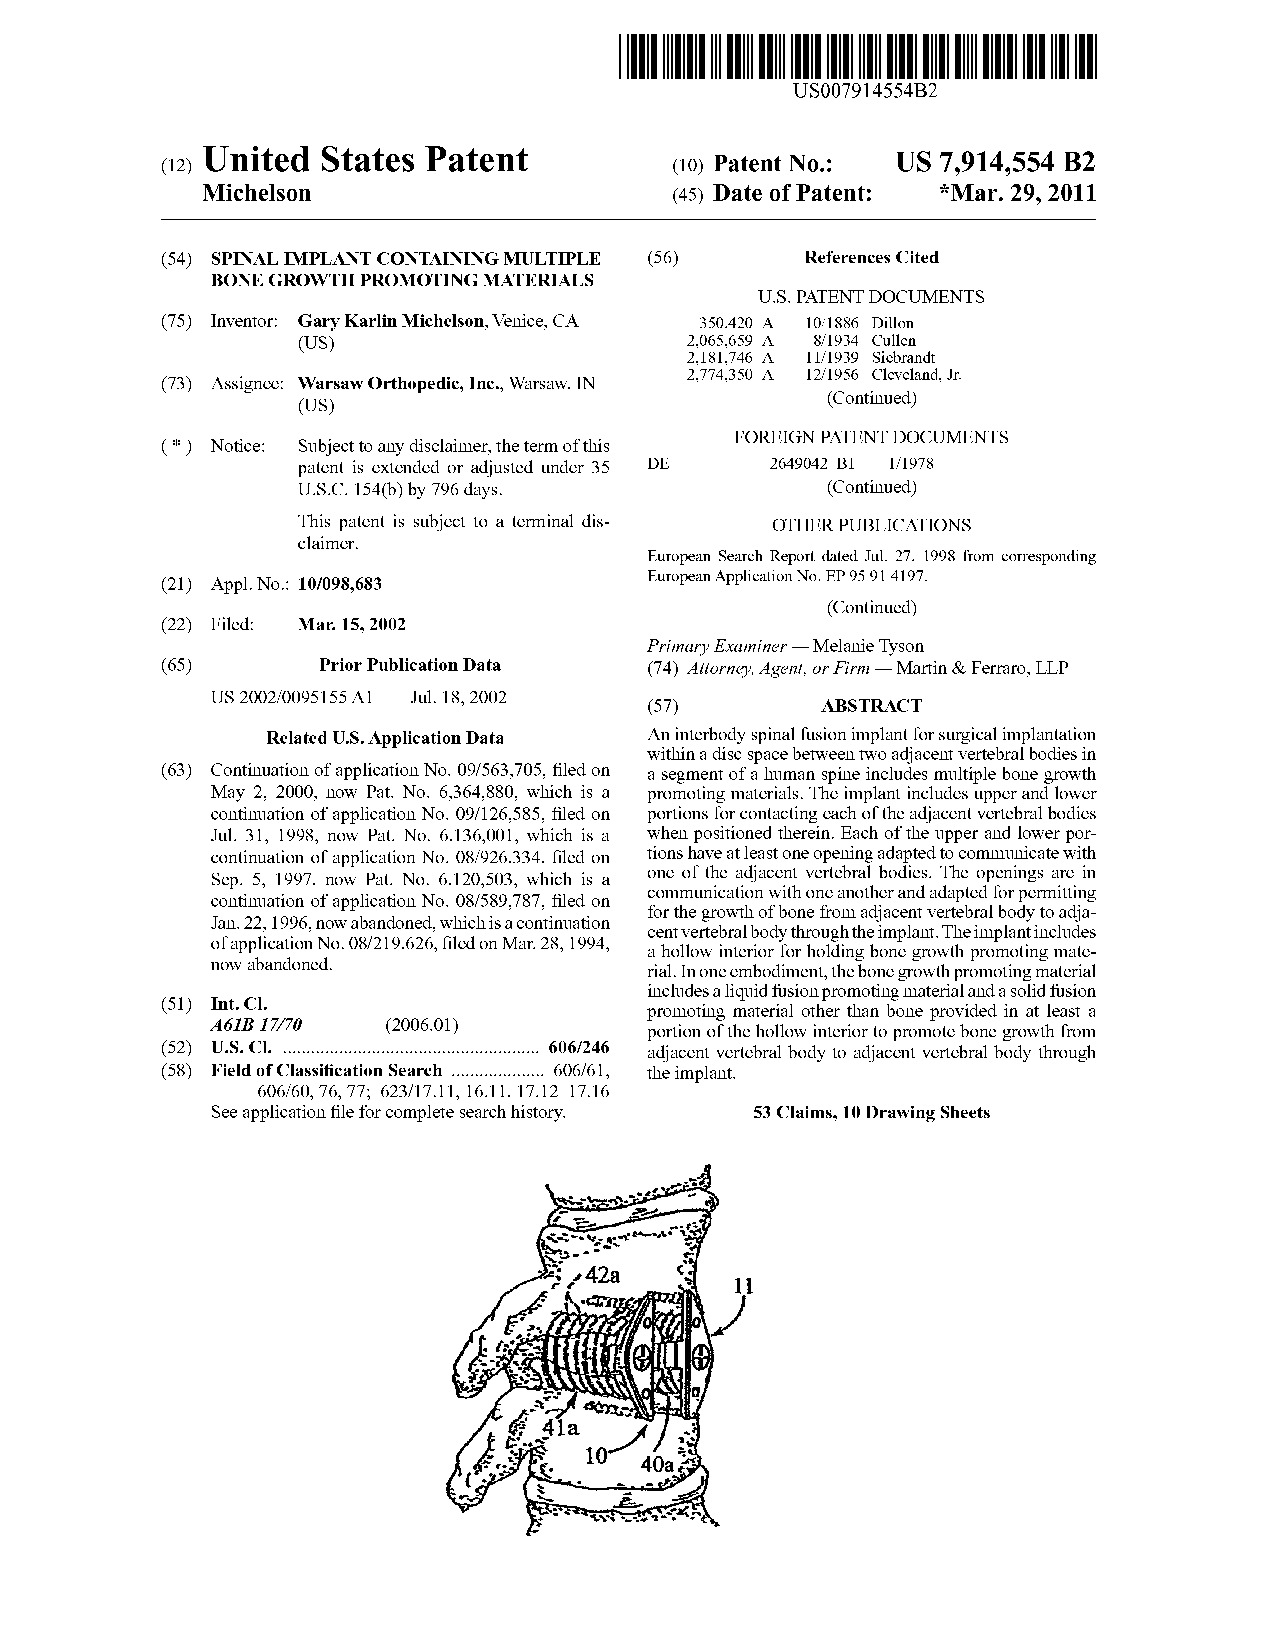 Spinal implant containing multiple bone growth promoting materials - Patent 7,914,554